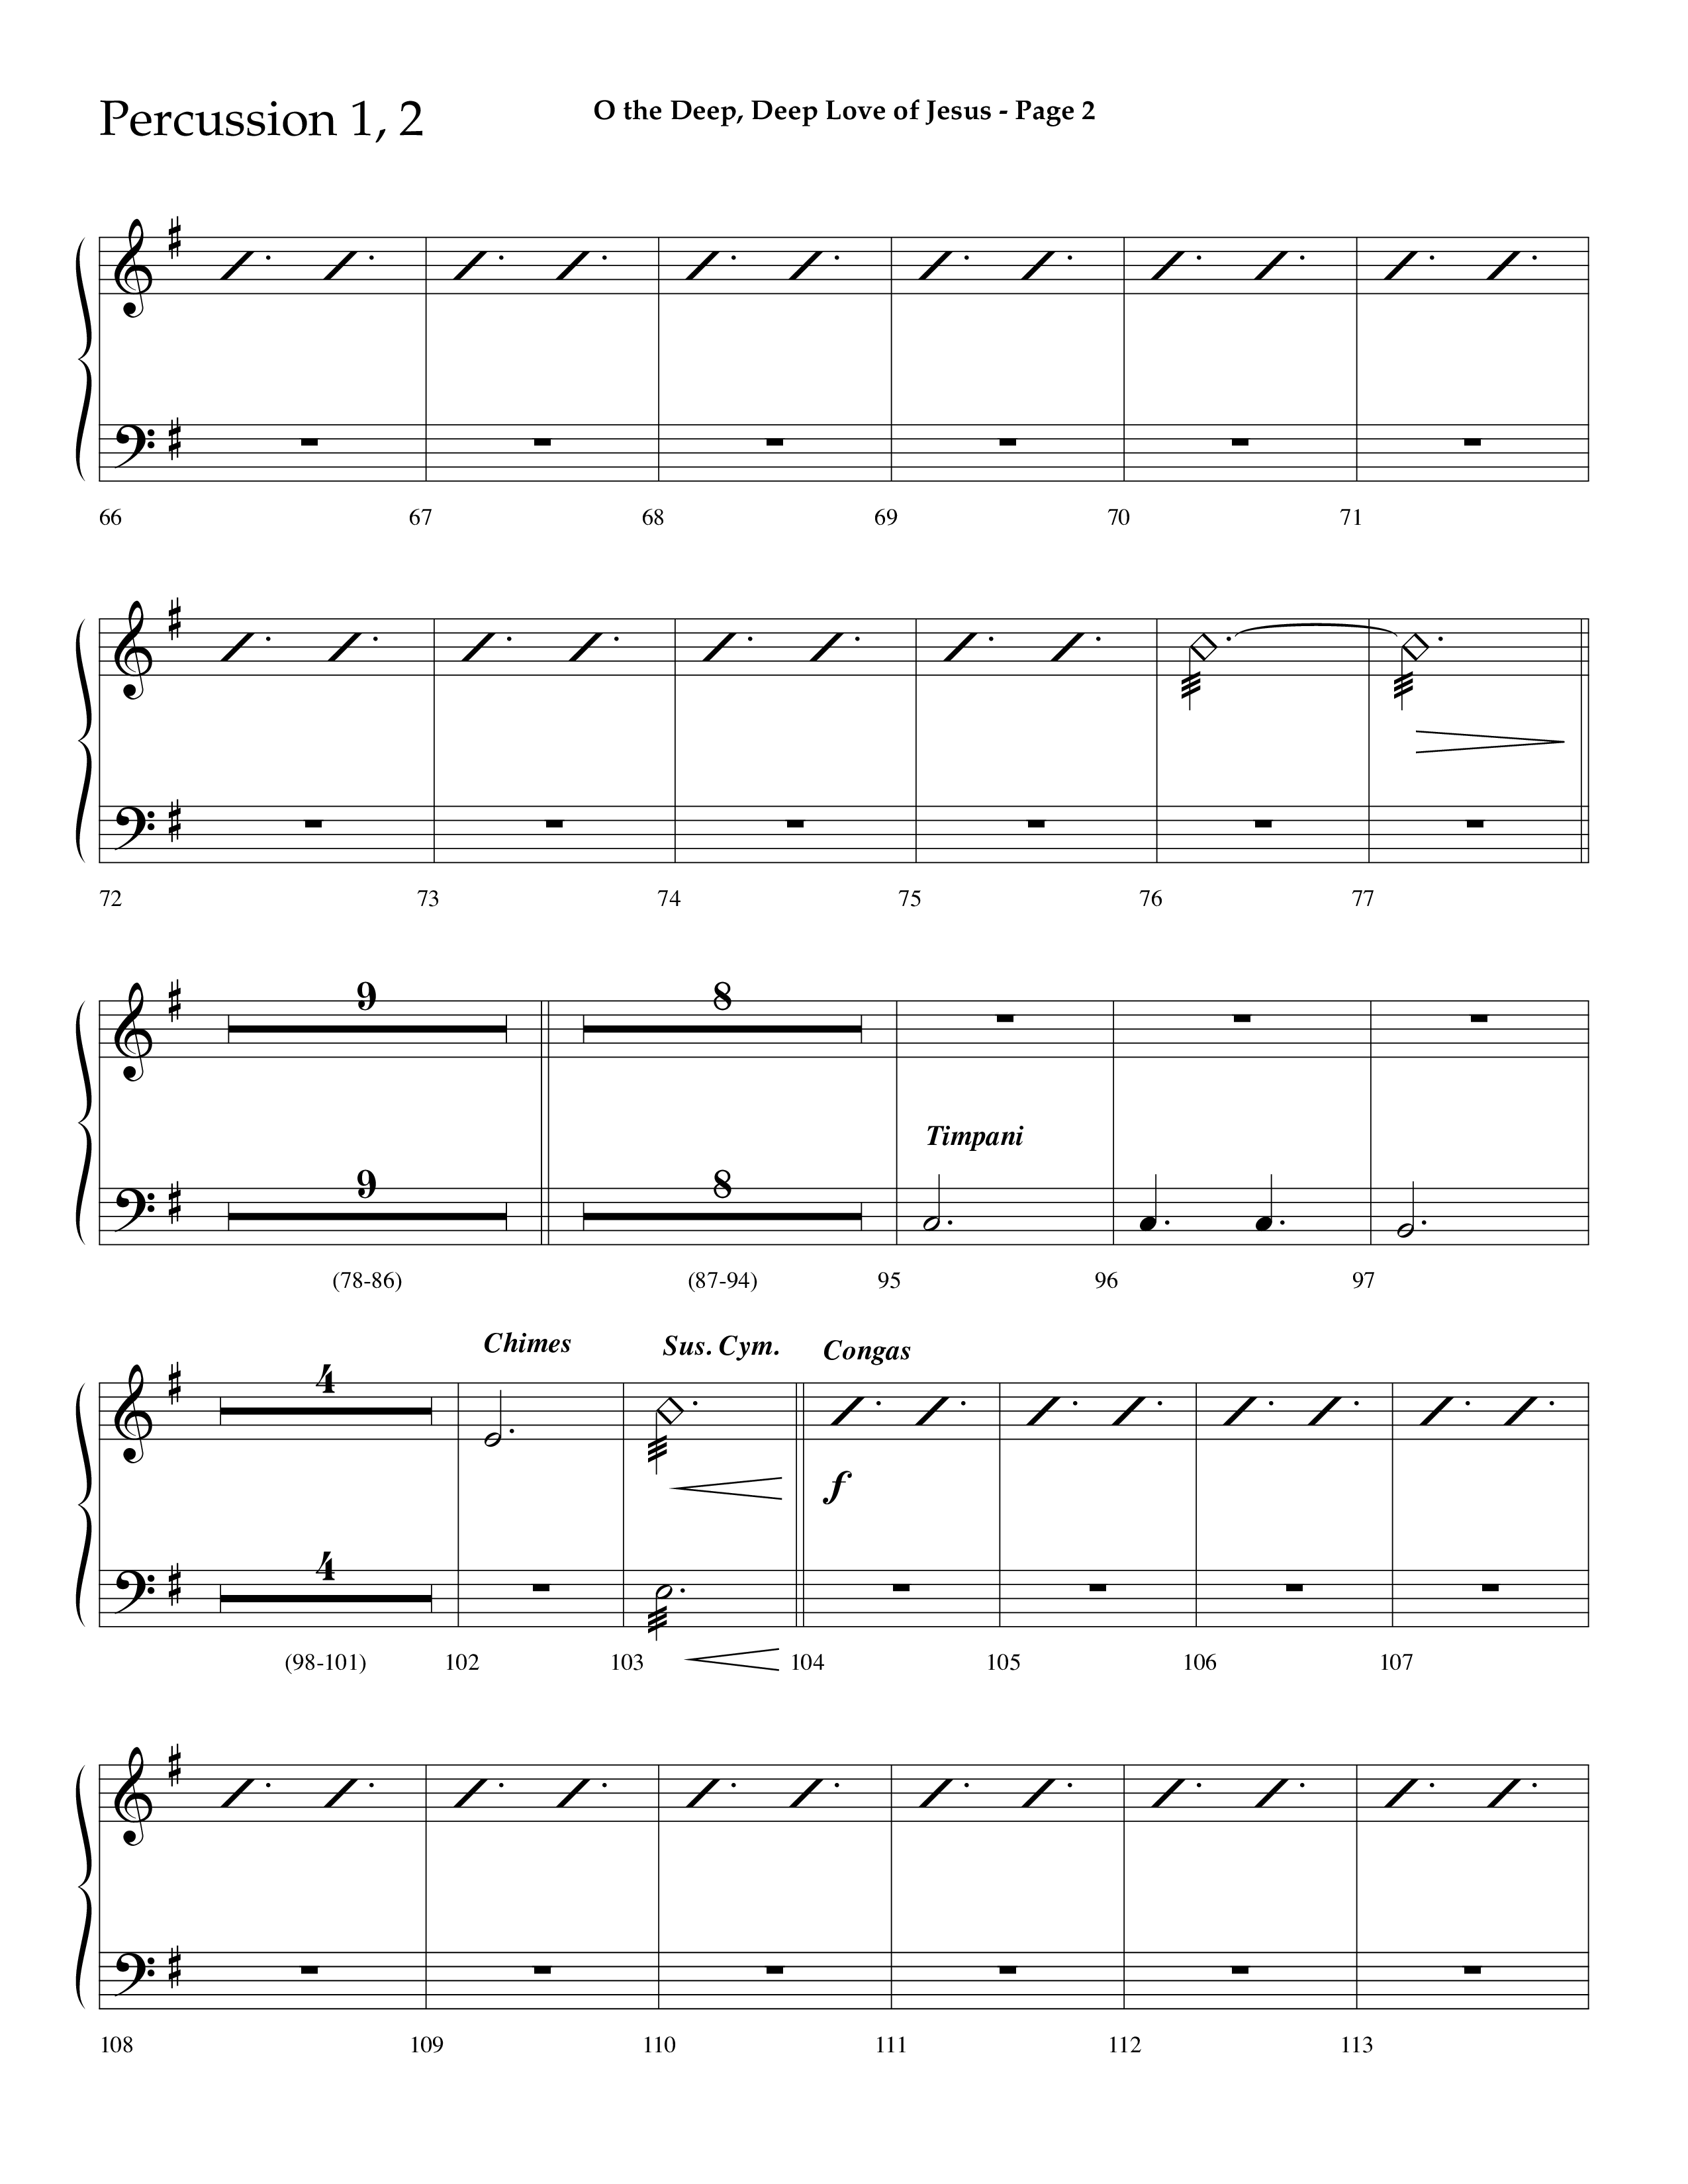 O The Deep Deep Love Of Jesus (Choral Anthem SATB) Percussion 1/2 (Lifeway Choral / Arr. Dave Williamson)